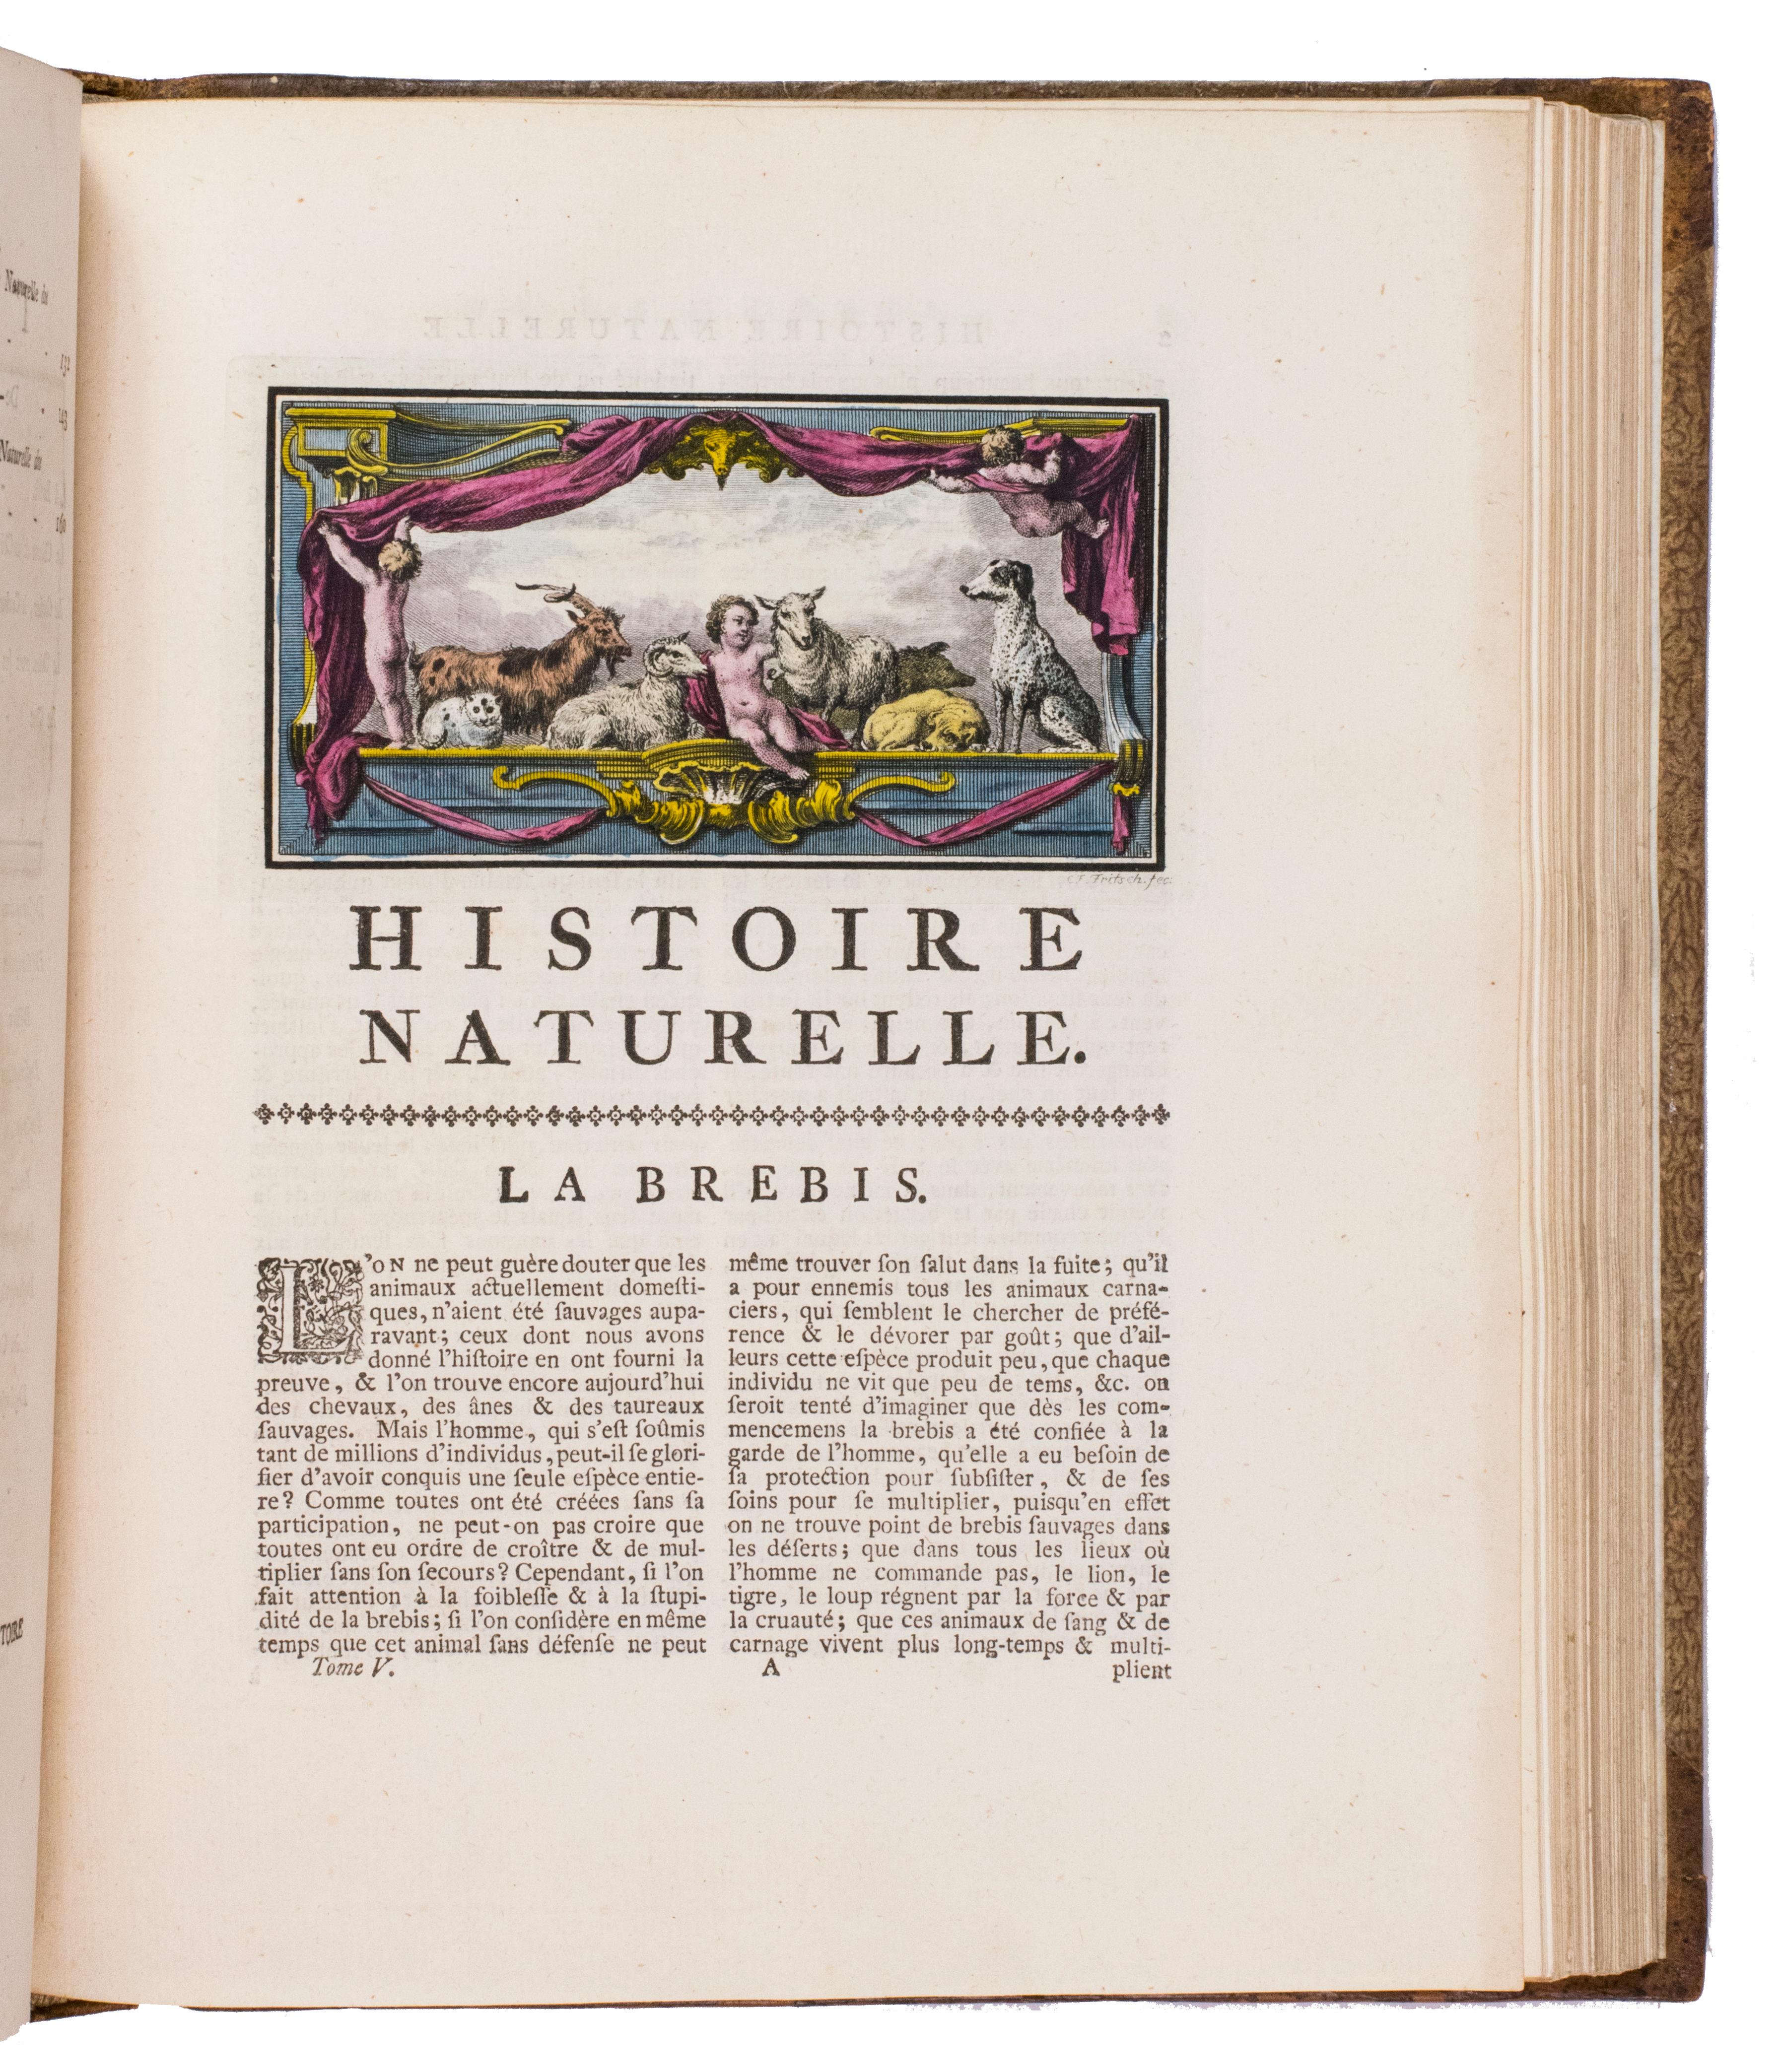 Hand-coloured set of Buffon’s Histoire naturelle in its most luxurious form For Sale 7